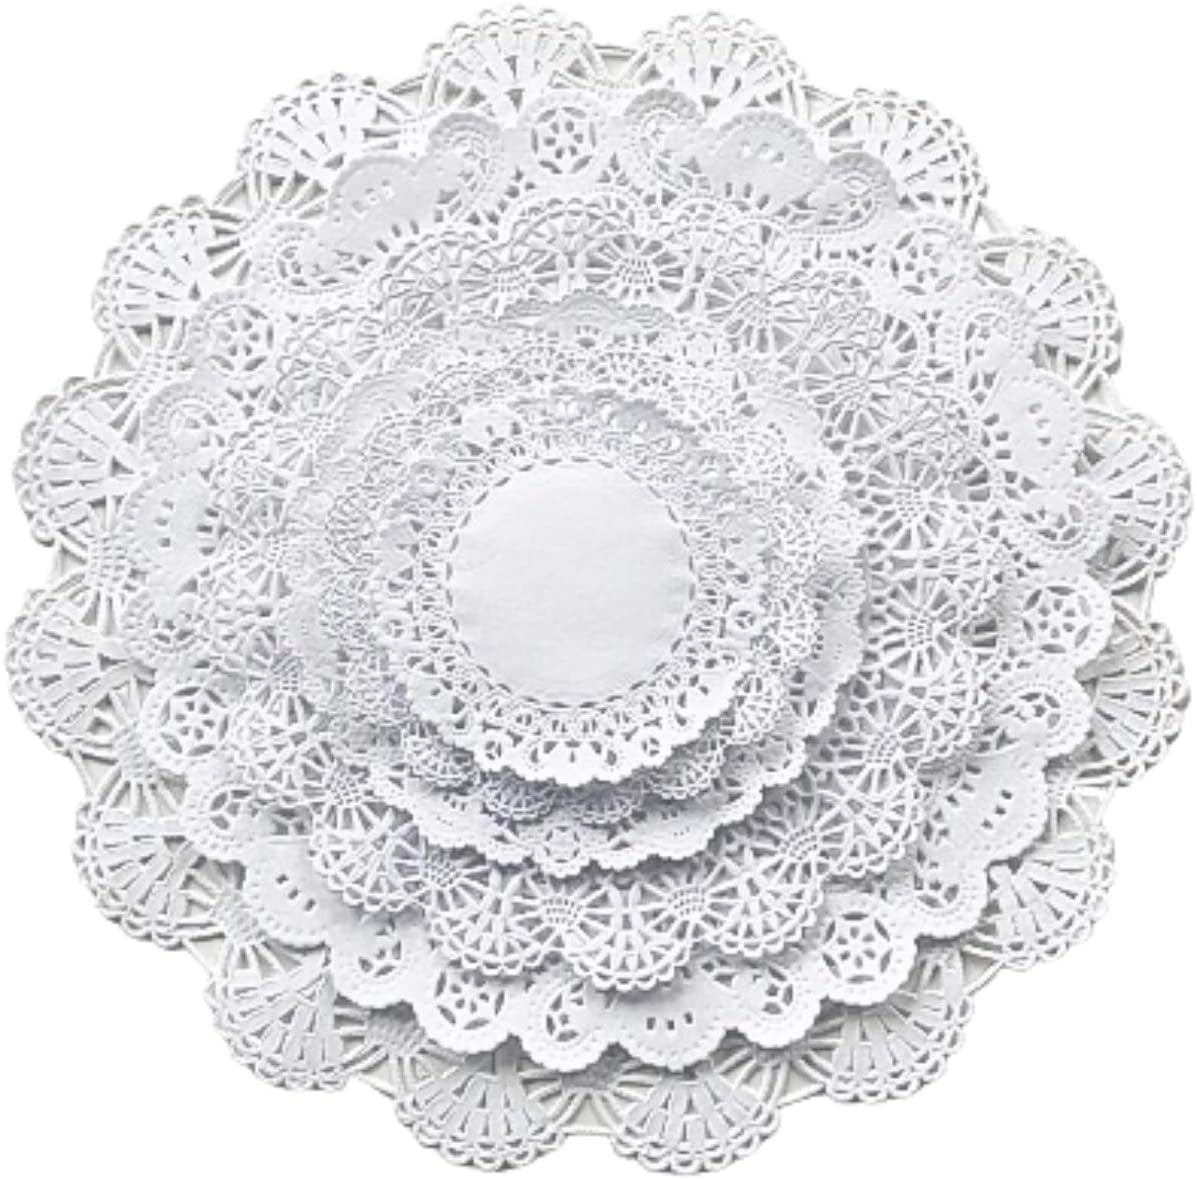 5-inch pack of 100 by The Baker Celebrations; Made in Canada White Round Paper Lace Doilies